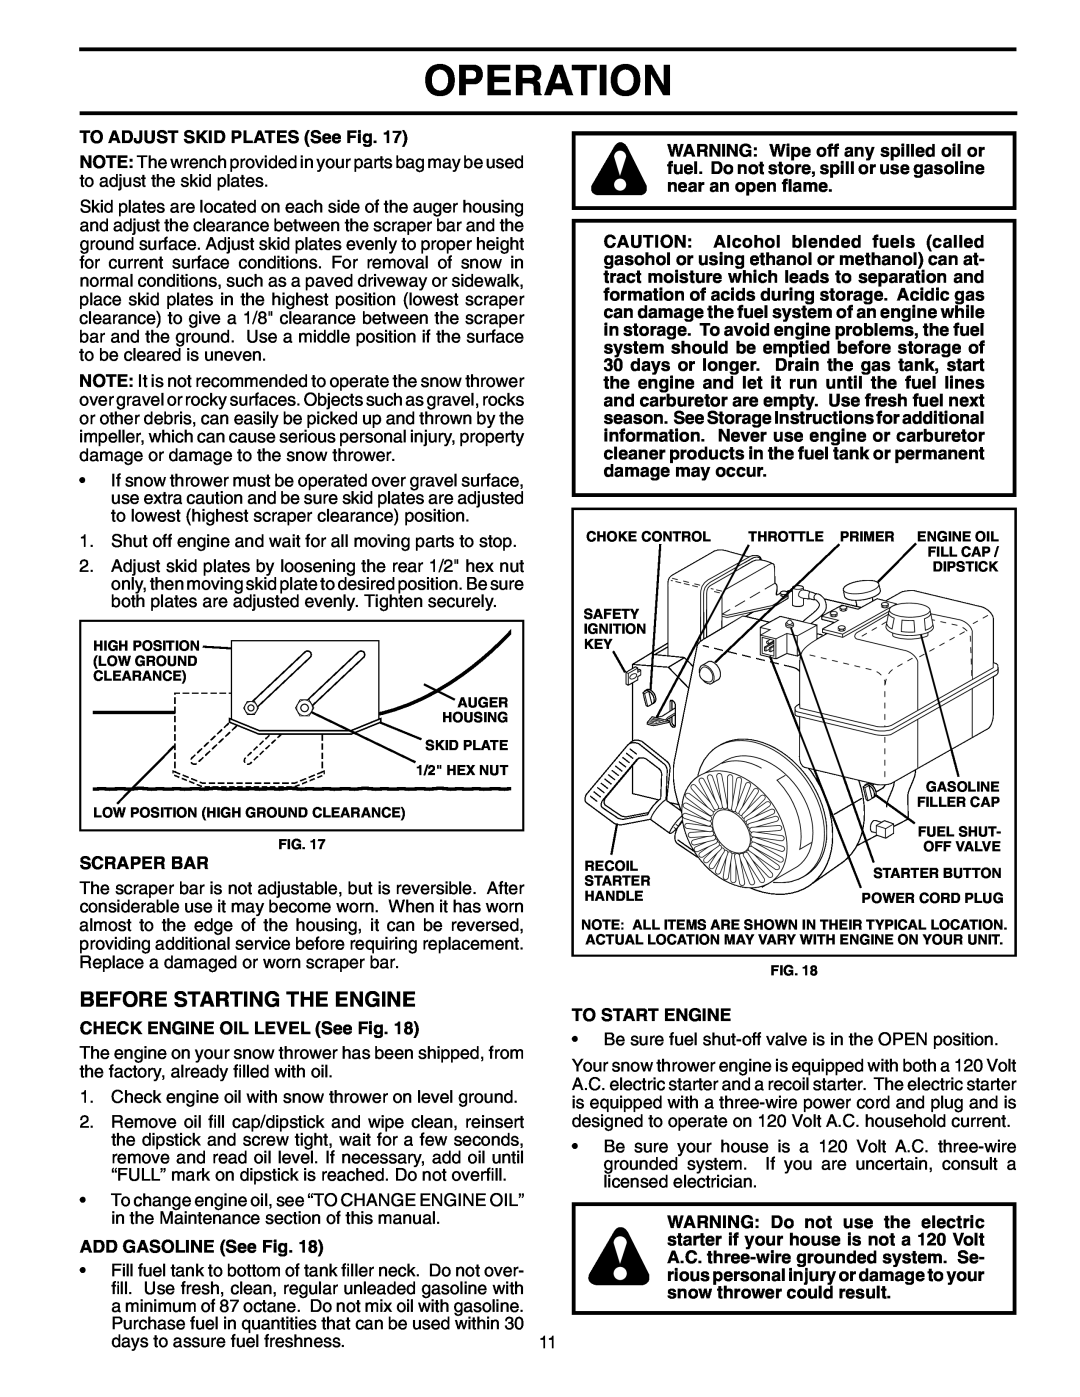 Poulan 199434 Before Starting The Engine, Operation, TO ADJUST SKID PLATES See Fig, Scraper Bar, ADD GASOLINE See Fig 